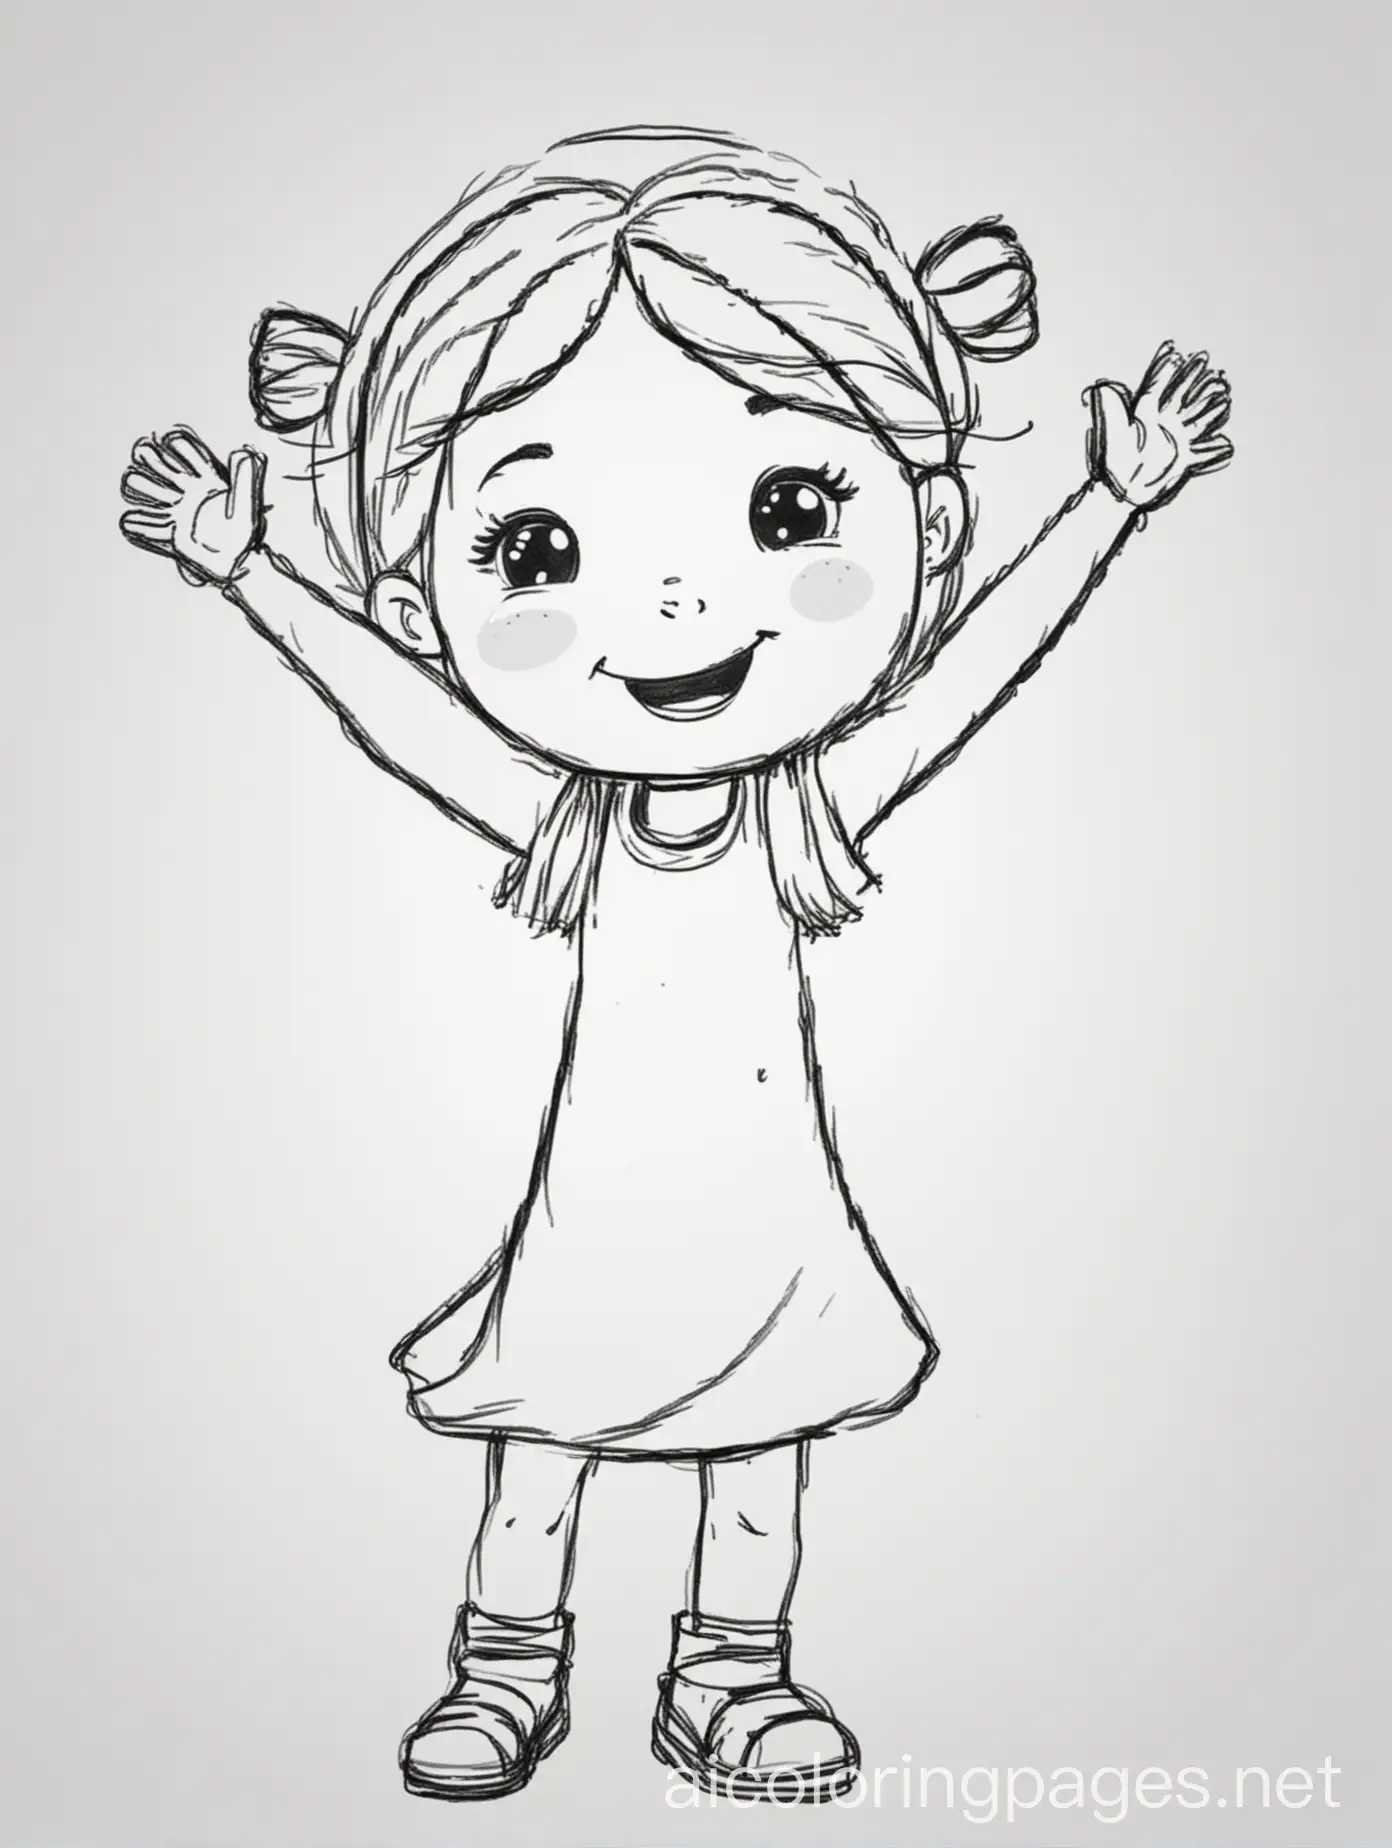 a cute little girl has her arms lifted up she is smiling and happy, Coloring Page, black and white, line art, white background, Simplicity, Ample White Space, Coloring Page, black and white, line art, white background, Simplicity, Ample White Space. The background of the coloring page is plain white to make it easy for young children to color within the lines. The outlines of all the subjects are easy to distinguish, making it simple for kids to color without too much difficulty